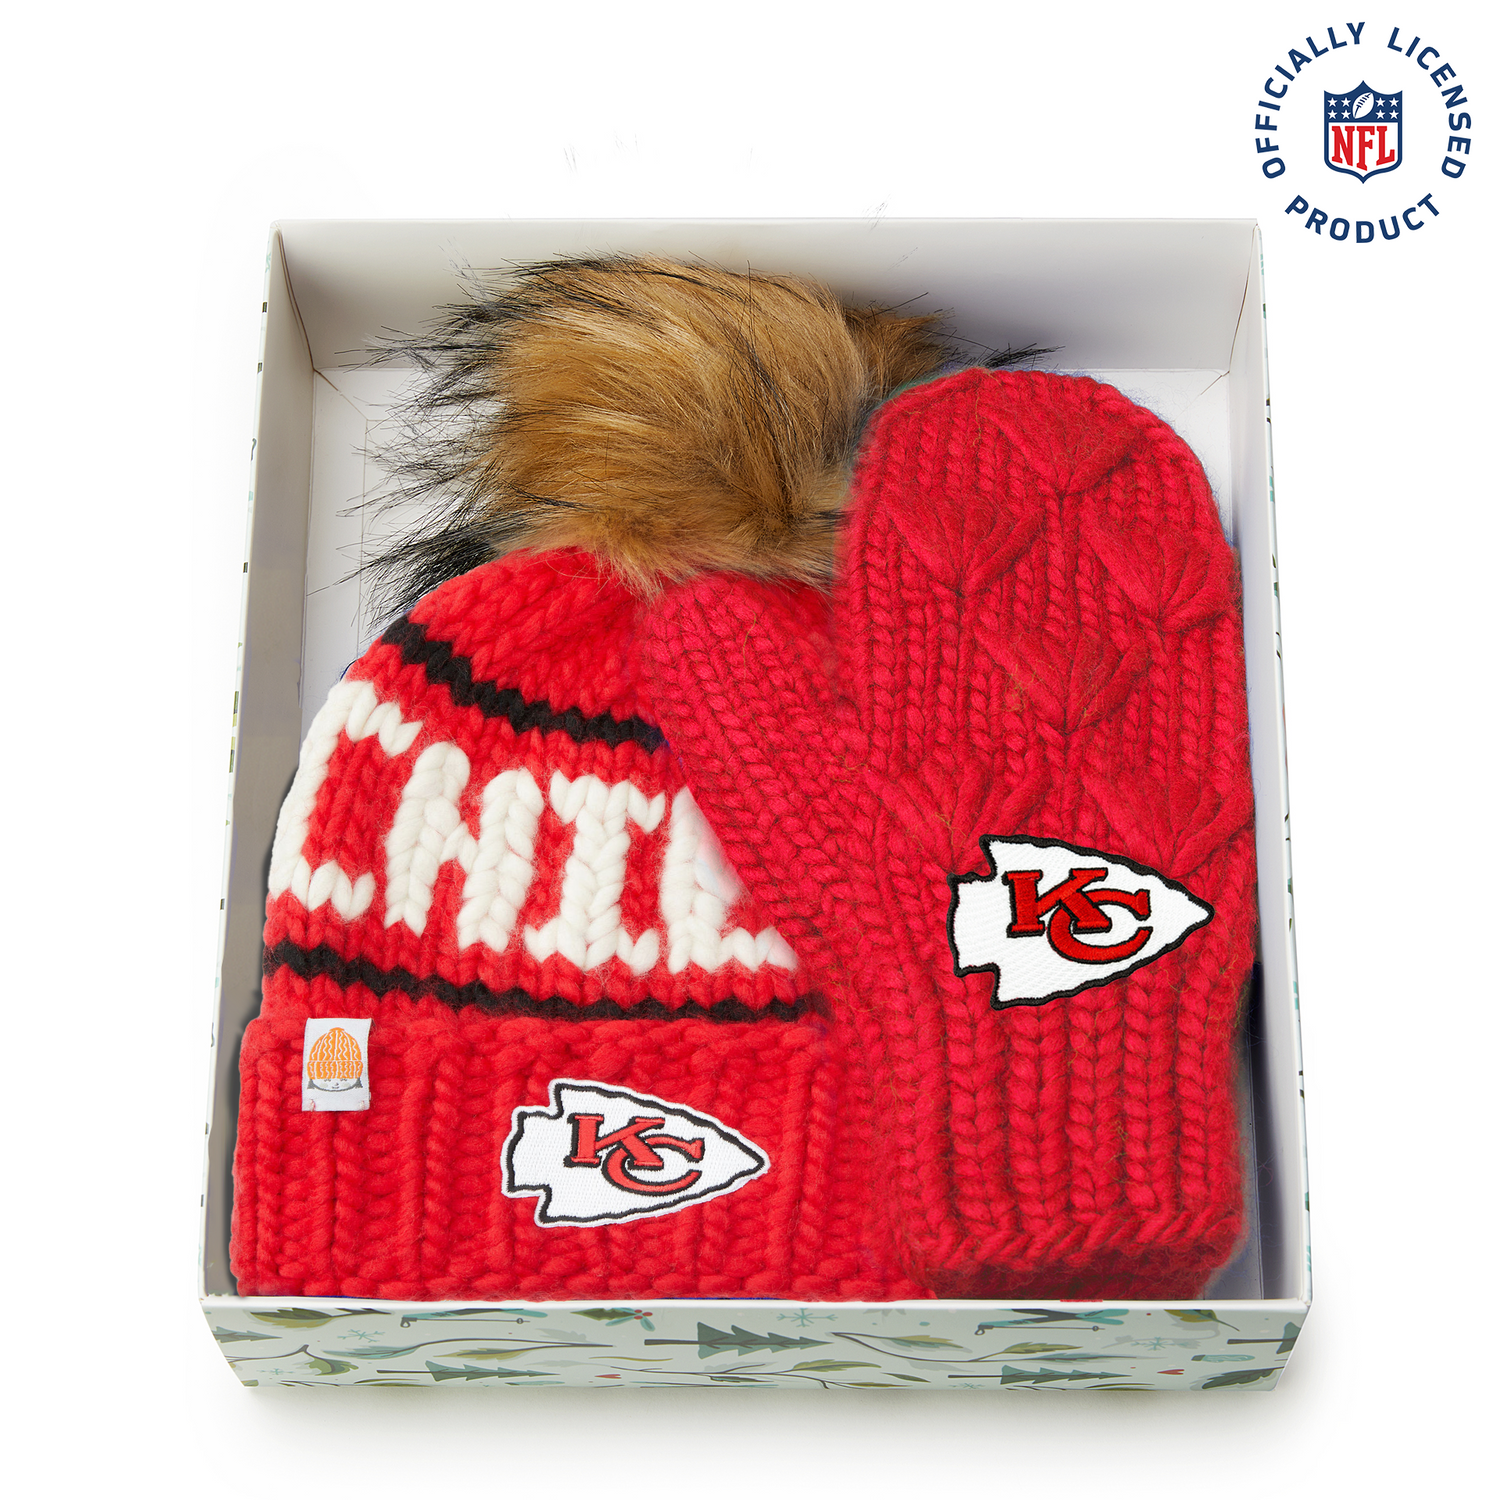 The Chiefs NFL Beanie and Mitten Gift Set